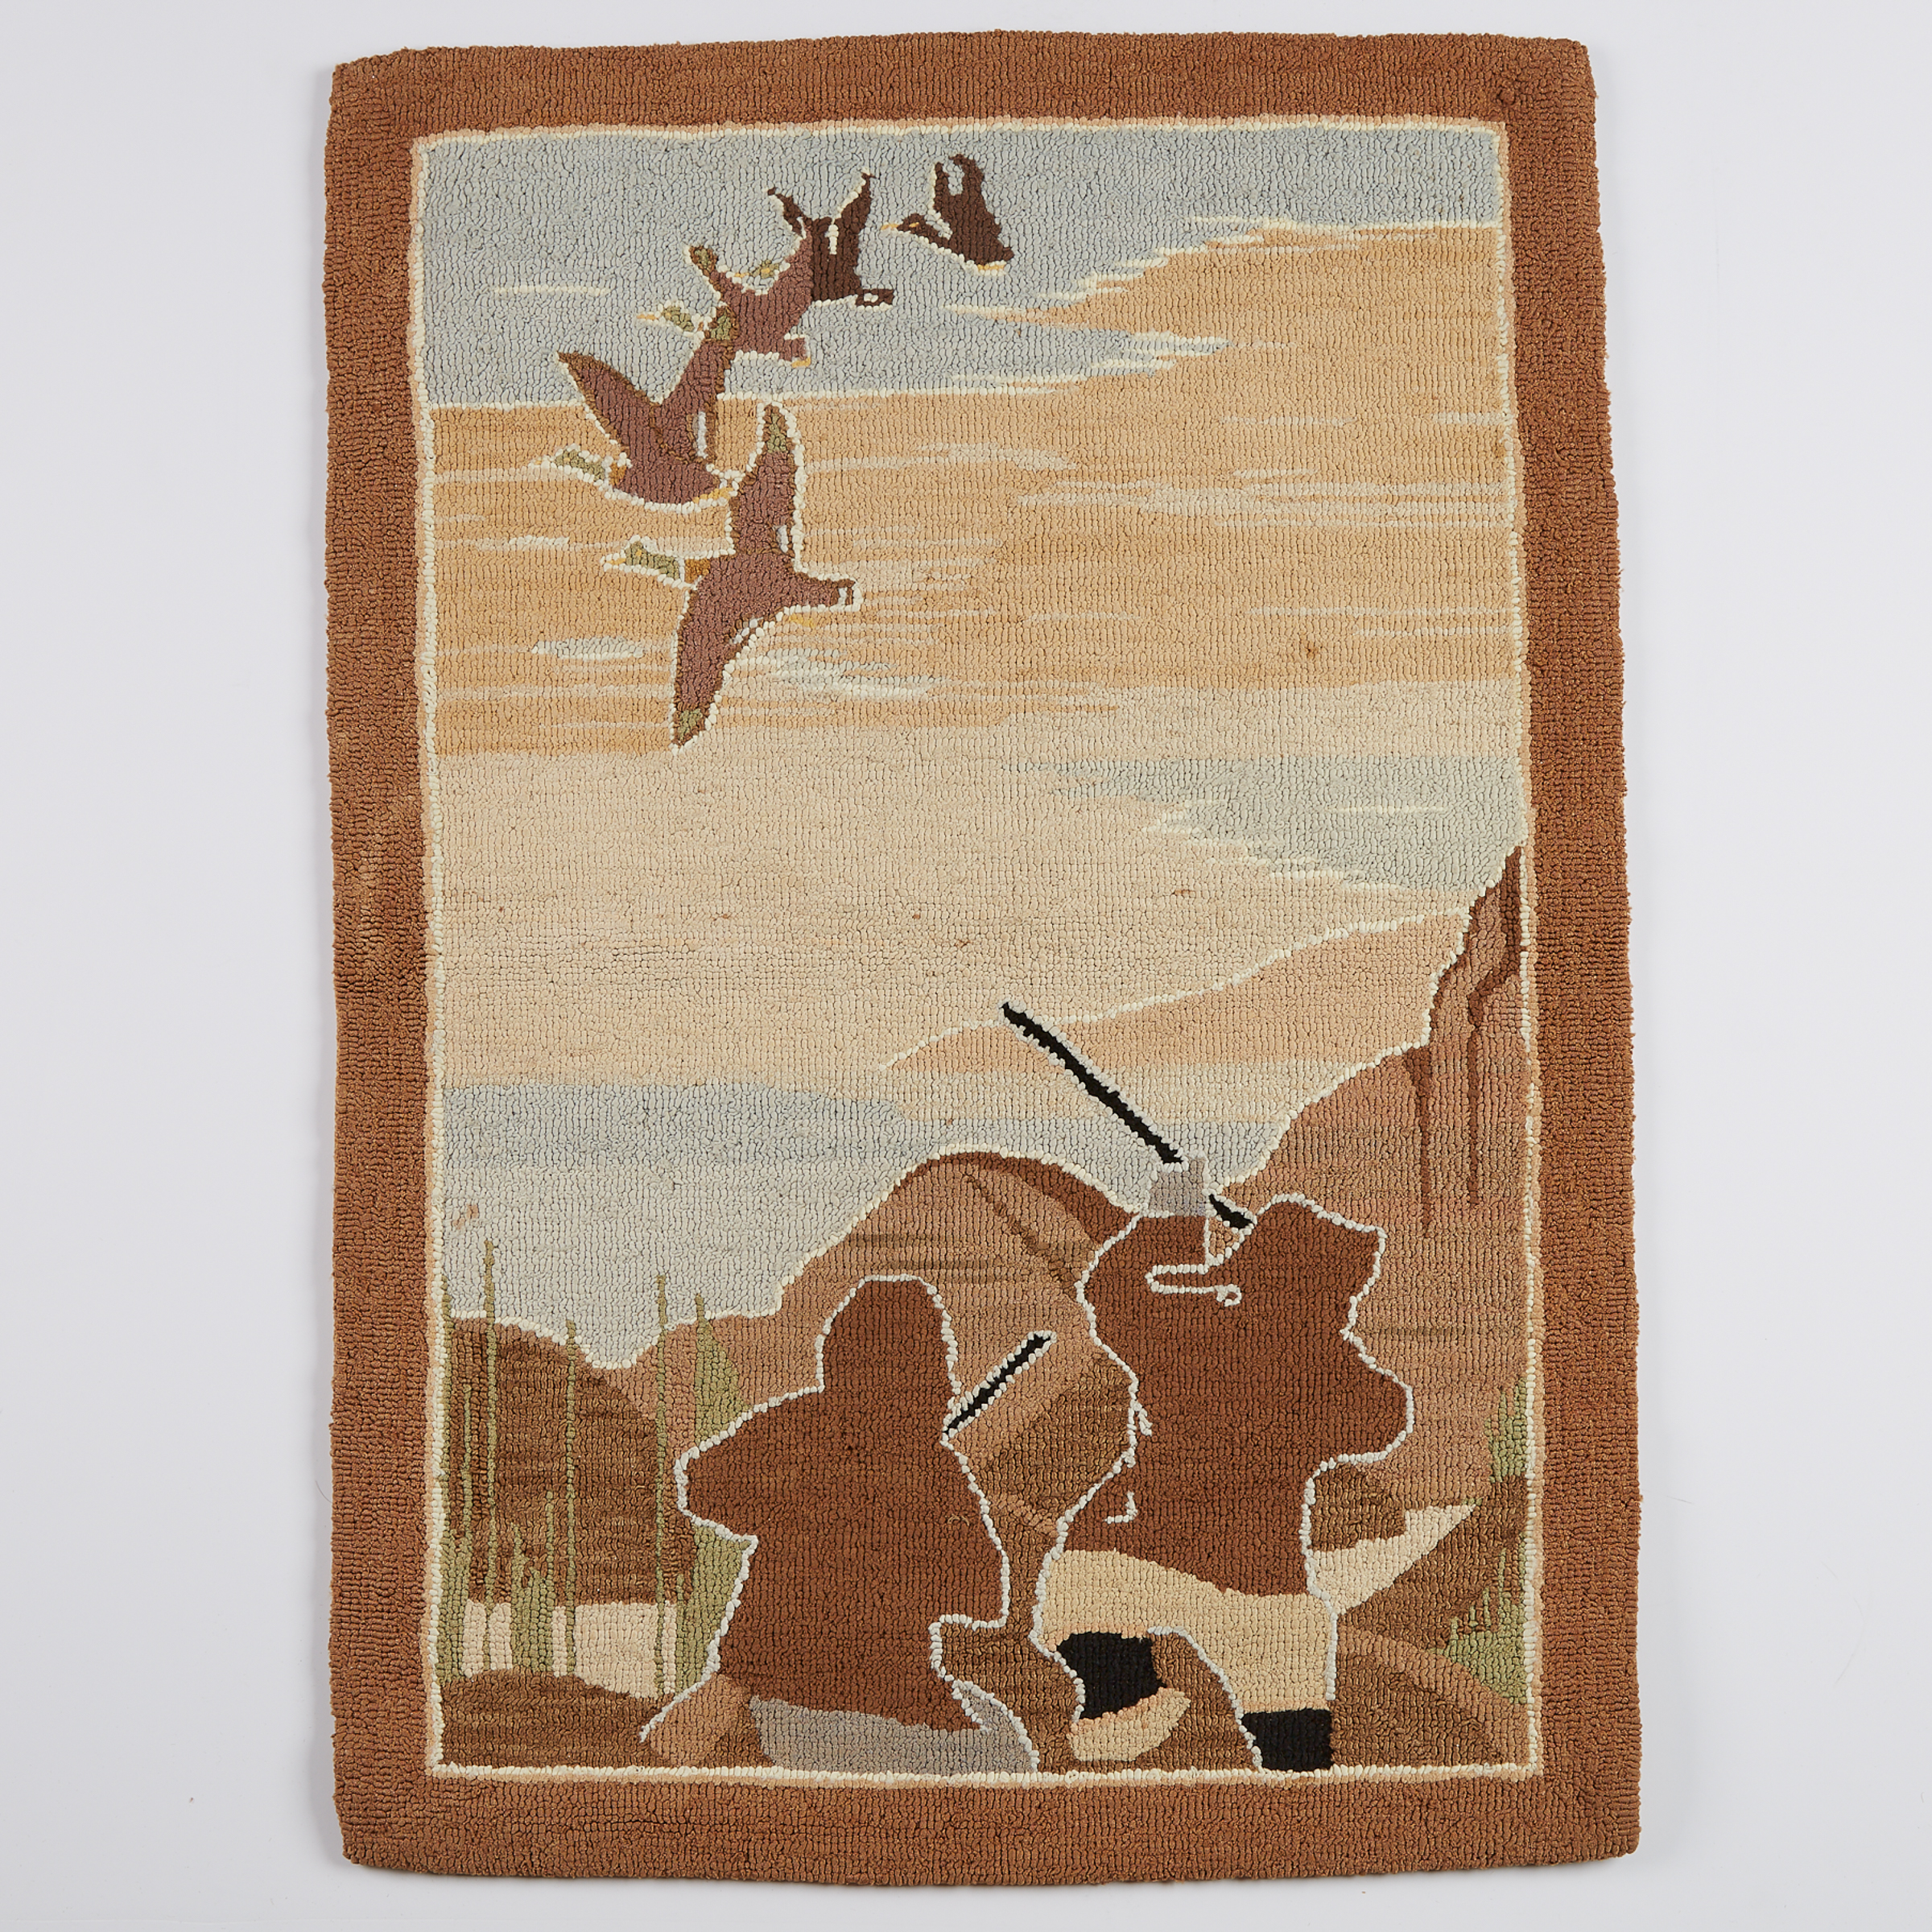 Grenfell Labrador Industries Duck Hunting Hooked Mat, c.1930